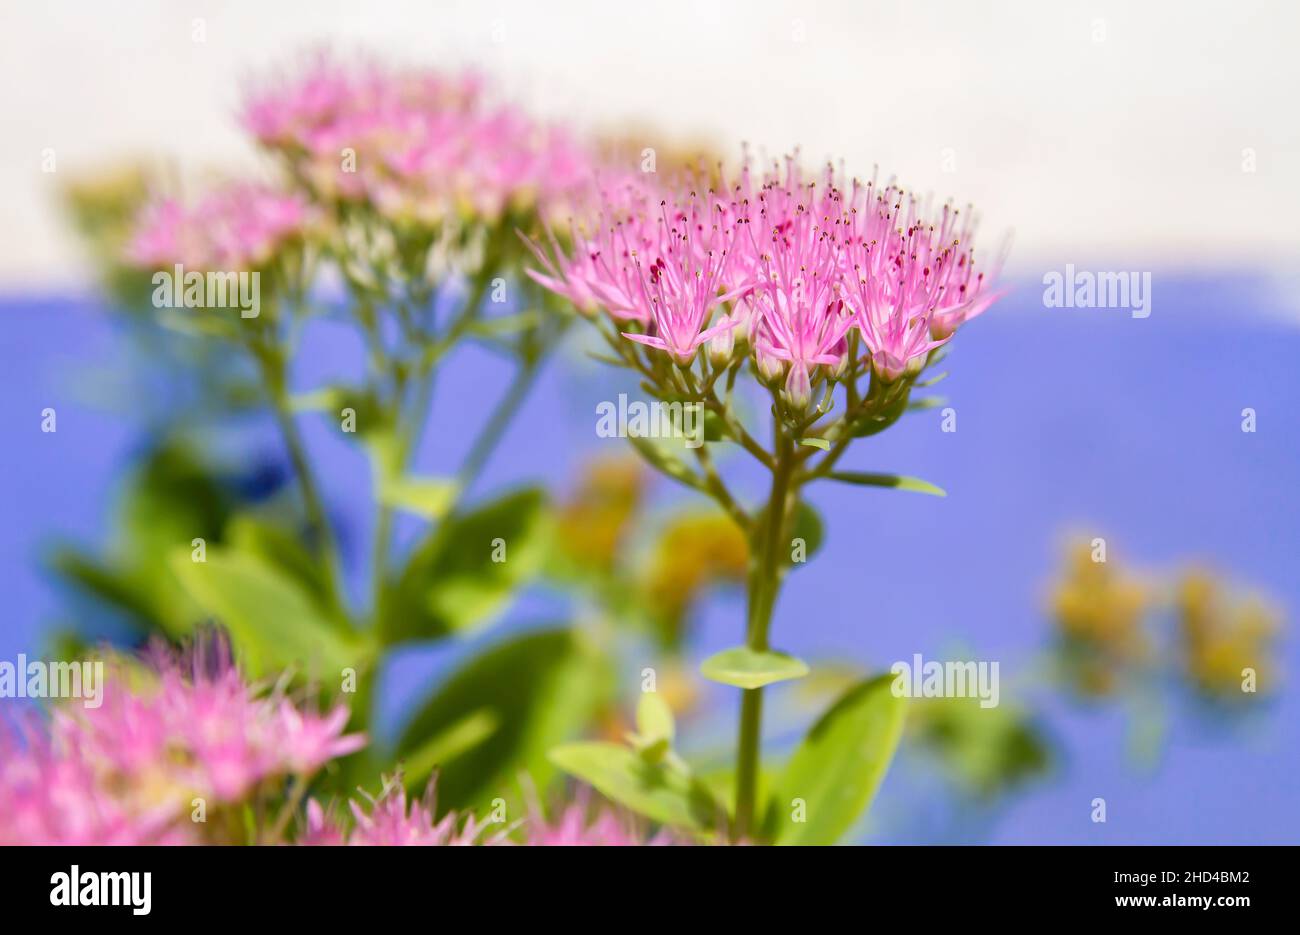 Hylotelephium spectabile pink flowers close up Stock Photo